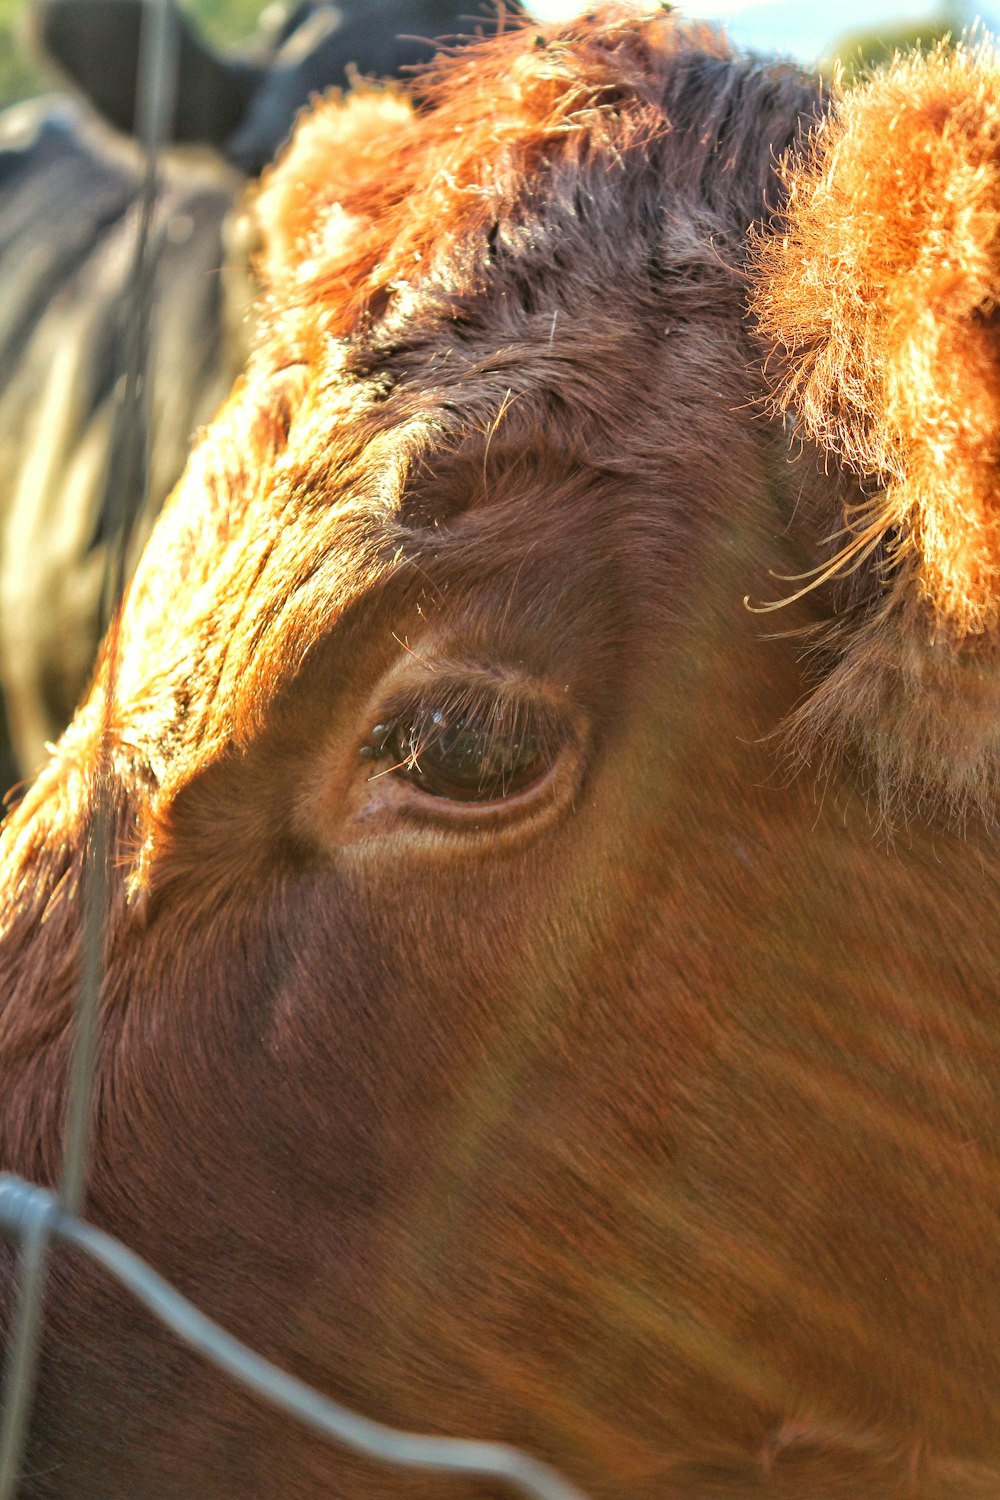 a close up of a cow's face with other cows in the background